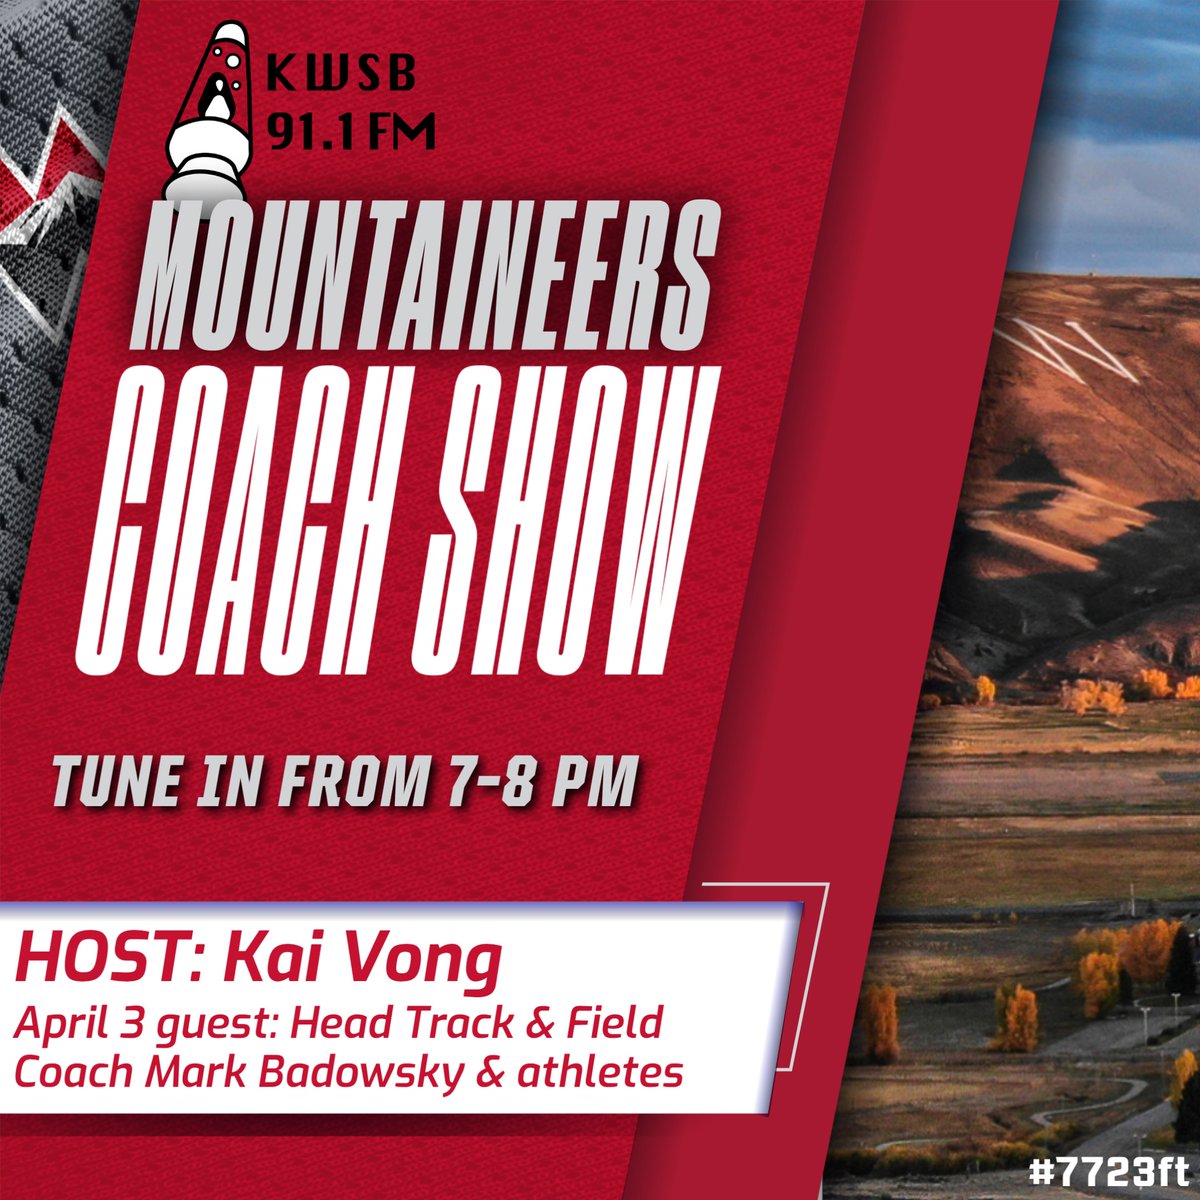 Catch T&F head coach Mark Badowsky and a couple of his athletes on tonight's Mountaineers Coach Show on KWSB! @KWSBfm @WesternTrack #ExcellenceElevated #7723ft #KWSBfm